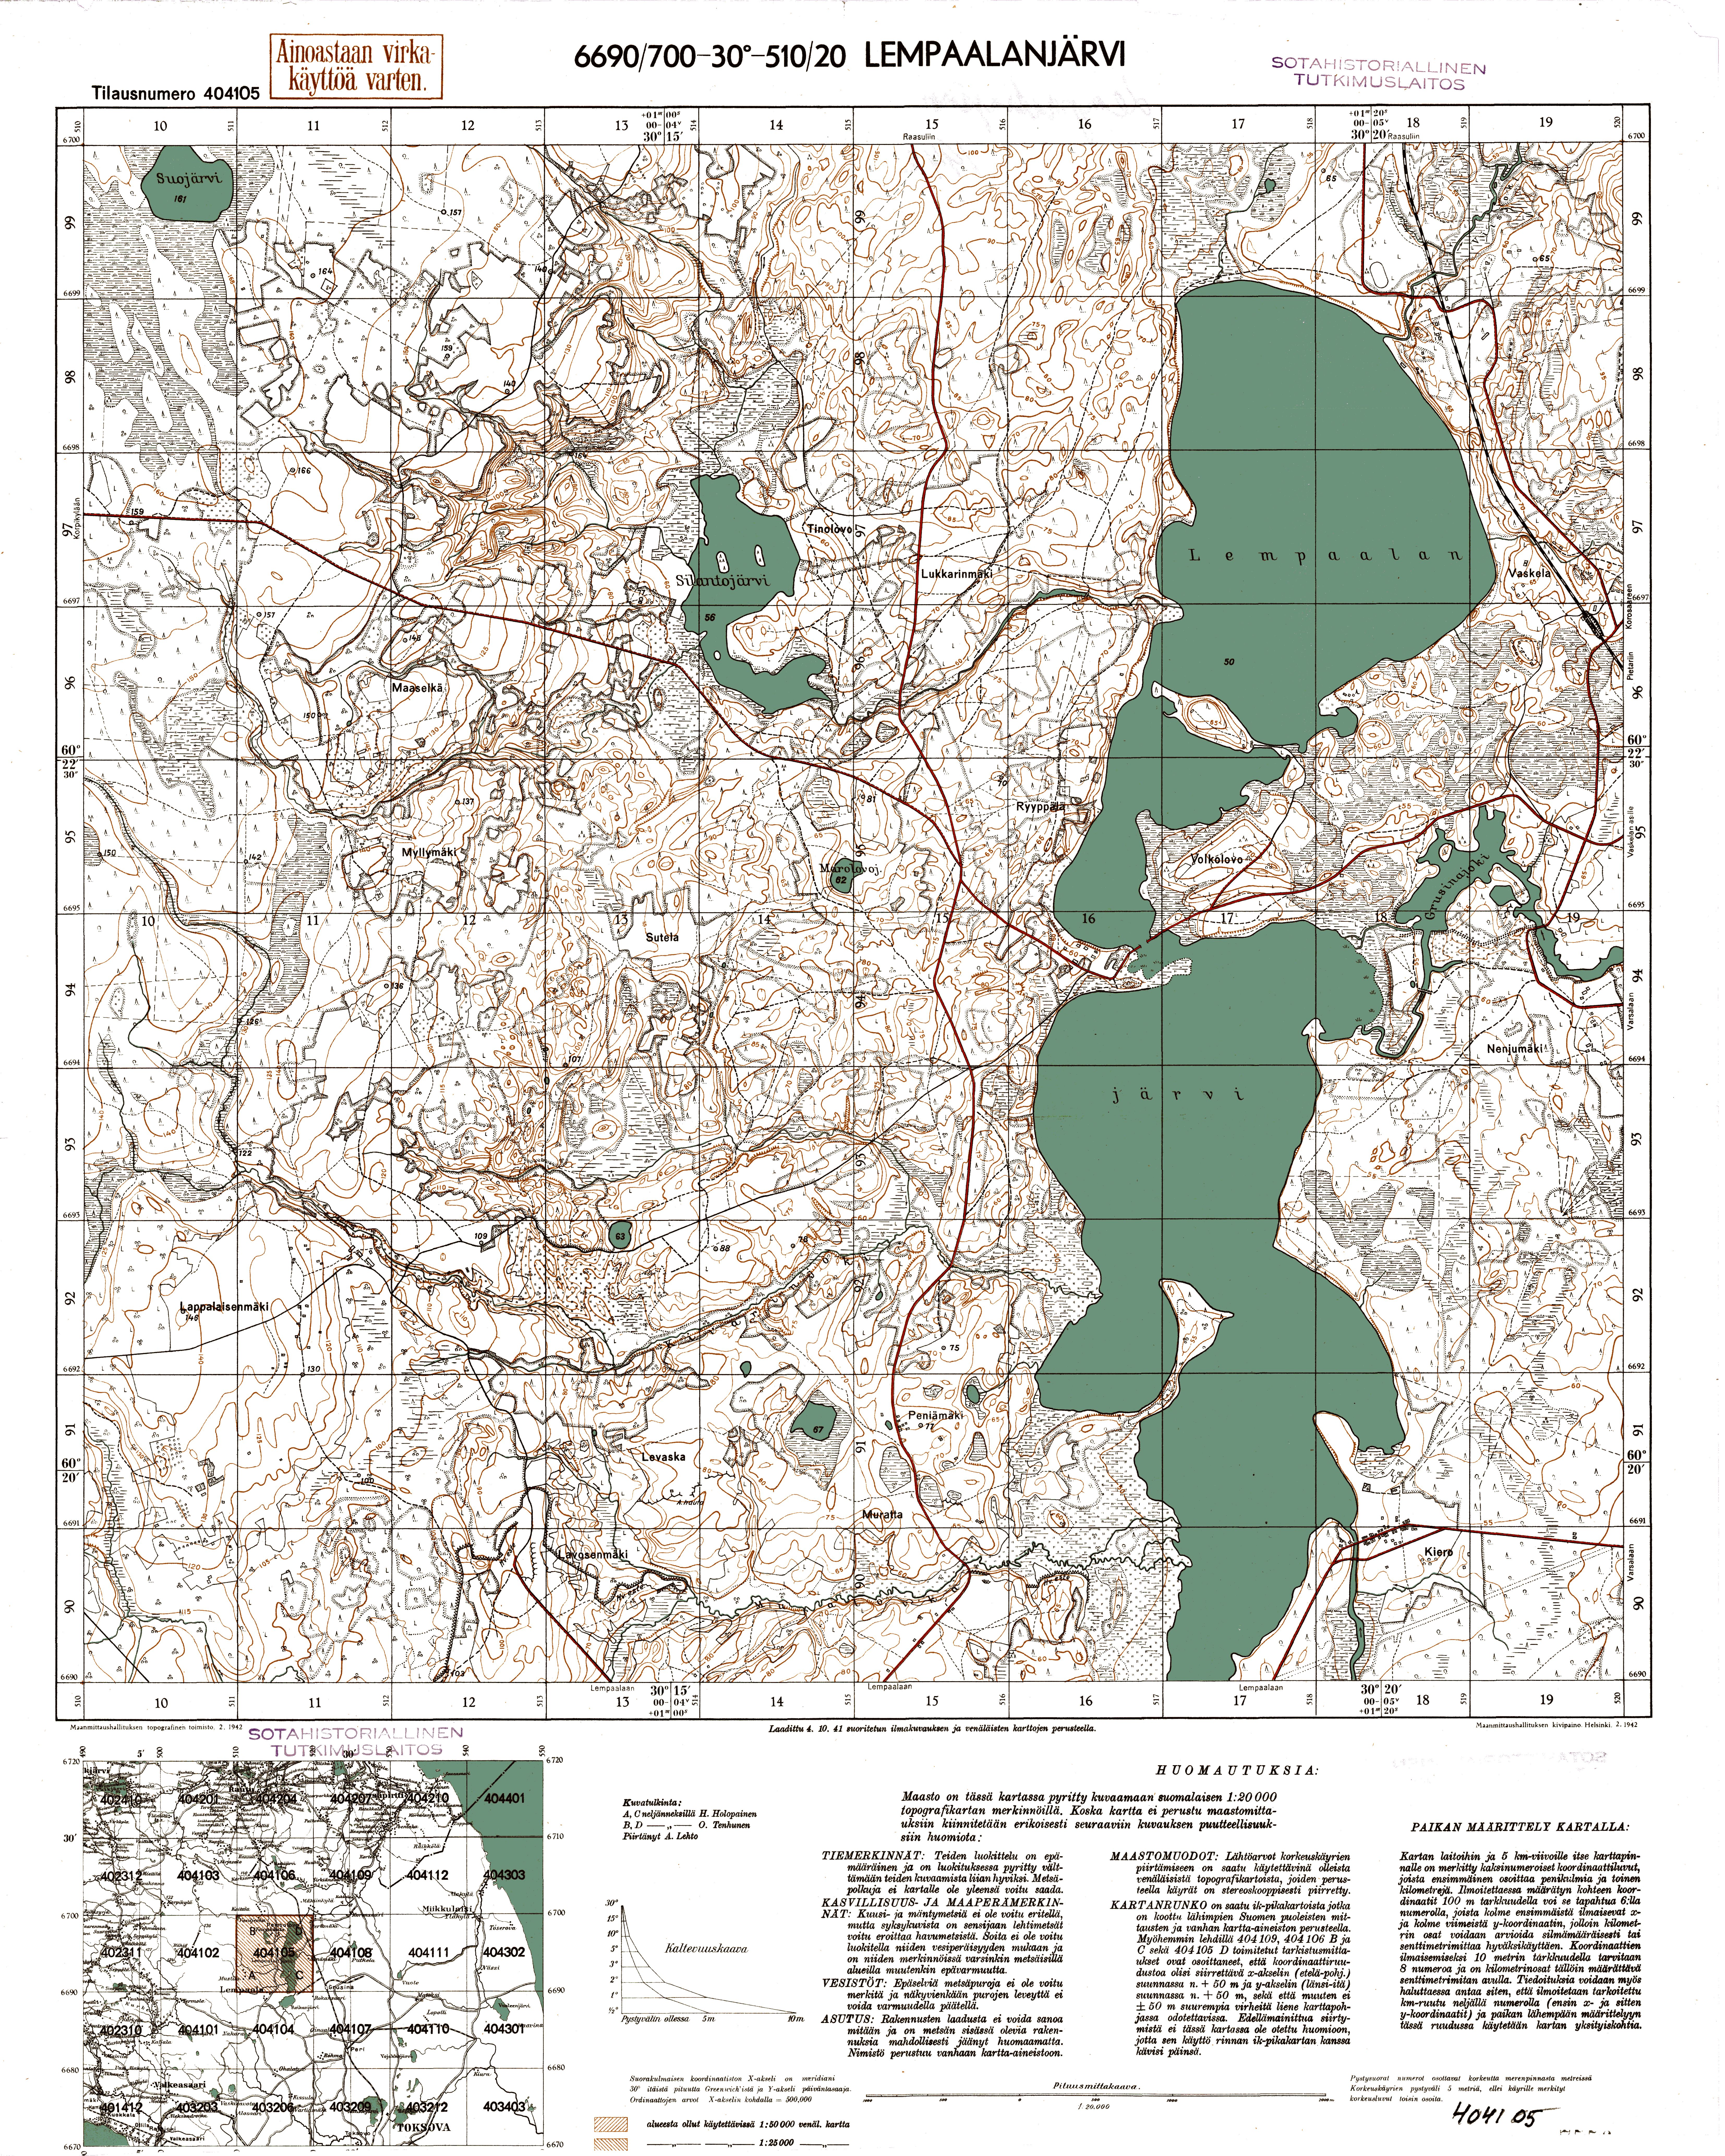 Lembolovskoje Lake (Toksovo). Lempaalanjärvi. Topografikartta 404105. Topographic map from 1942. Use the zooming tool to explore in higher level of detail. Obtain as a quality print or high resolution image